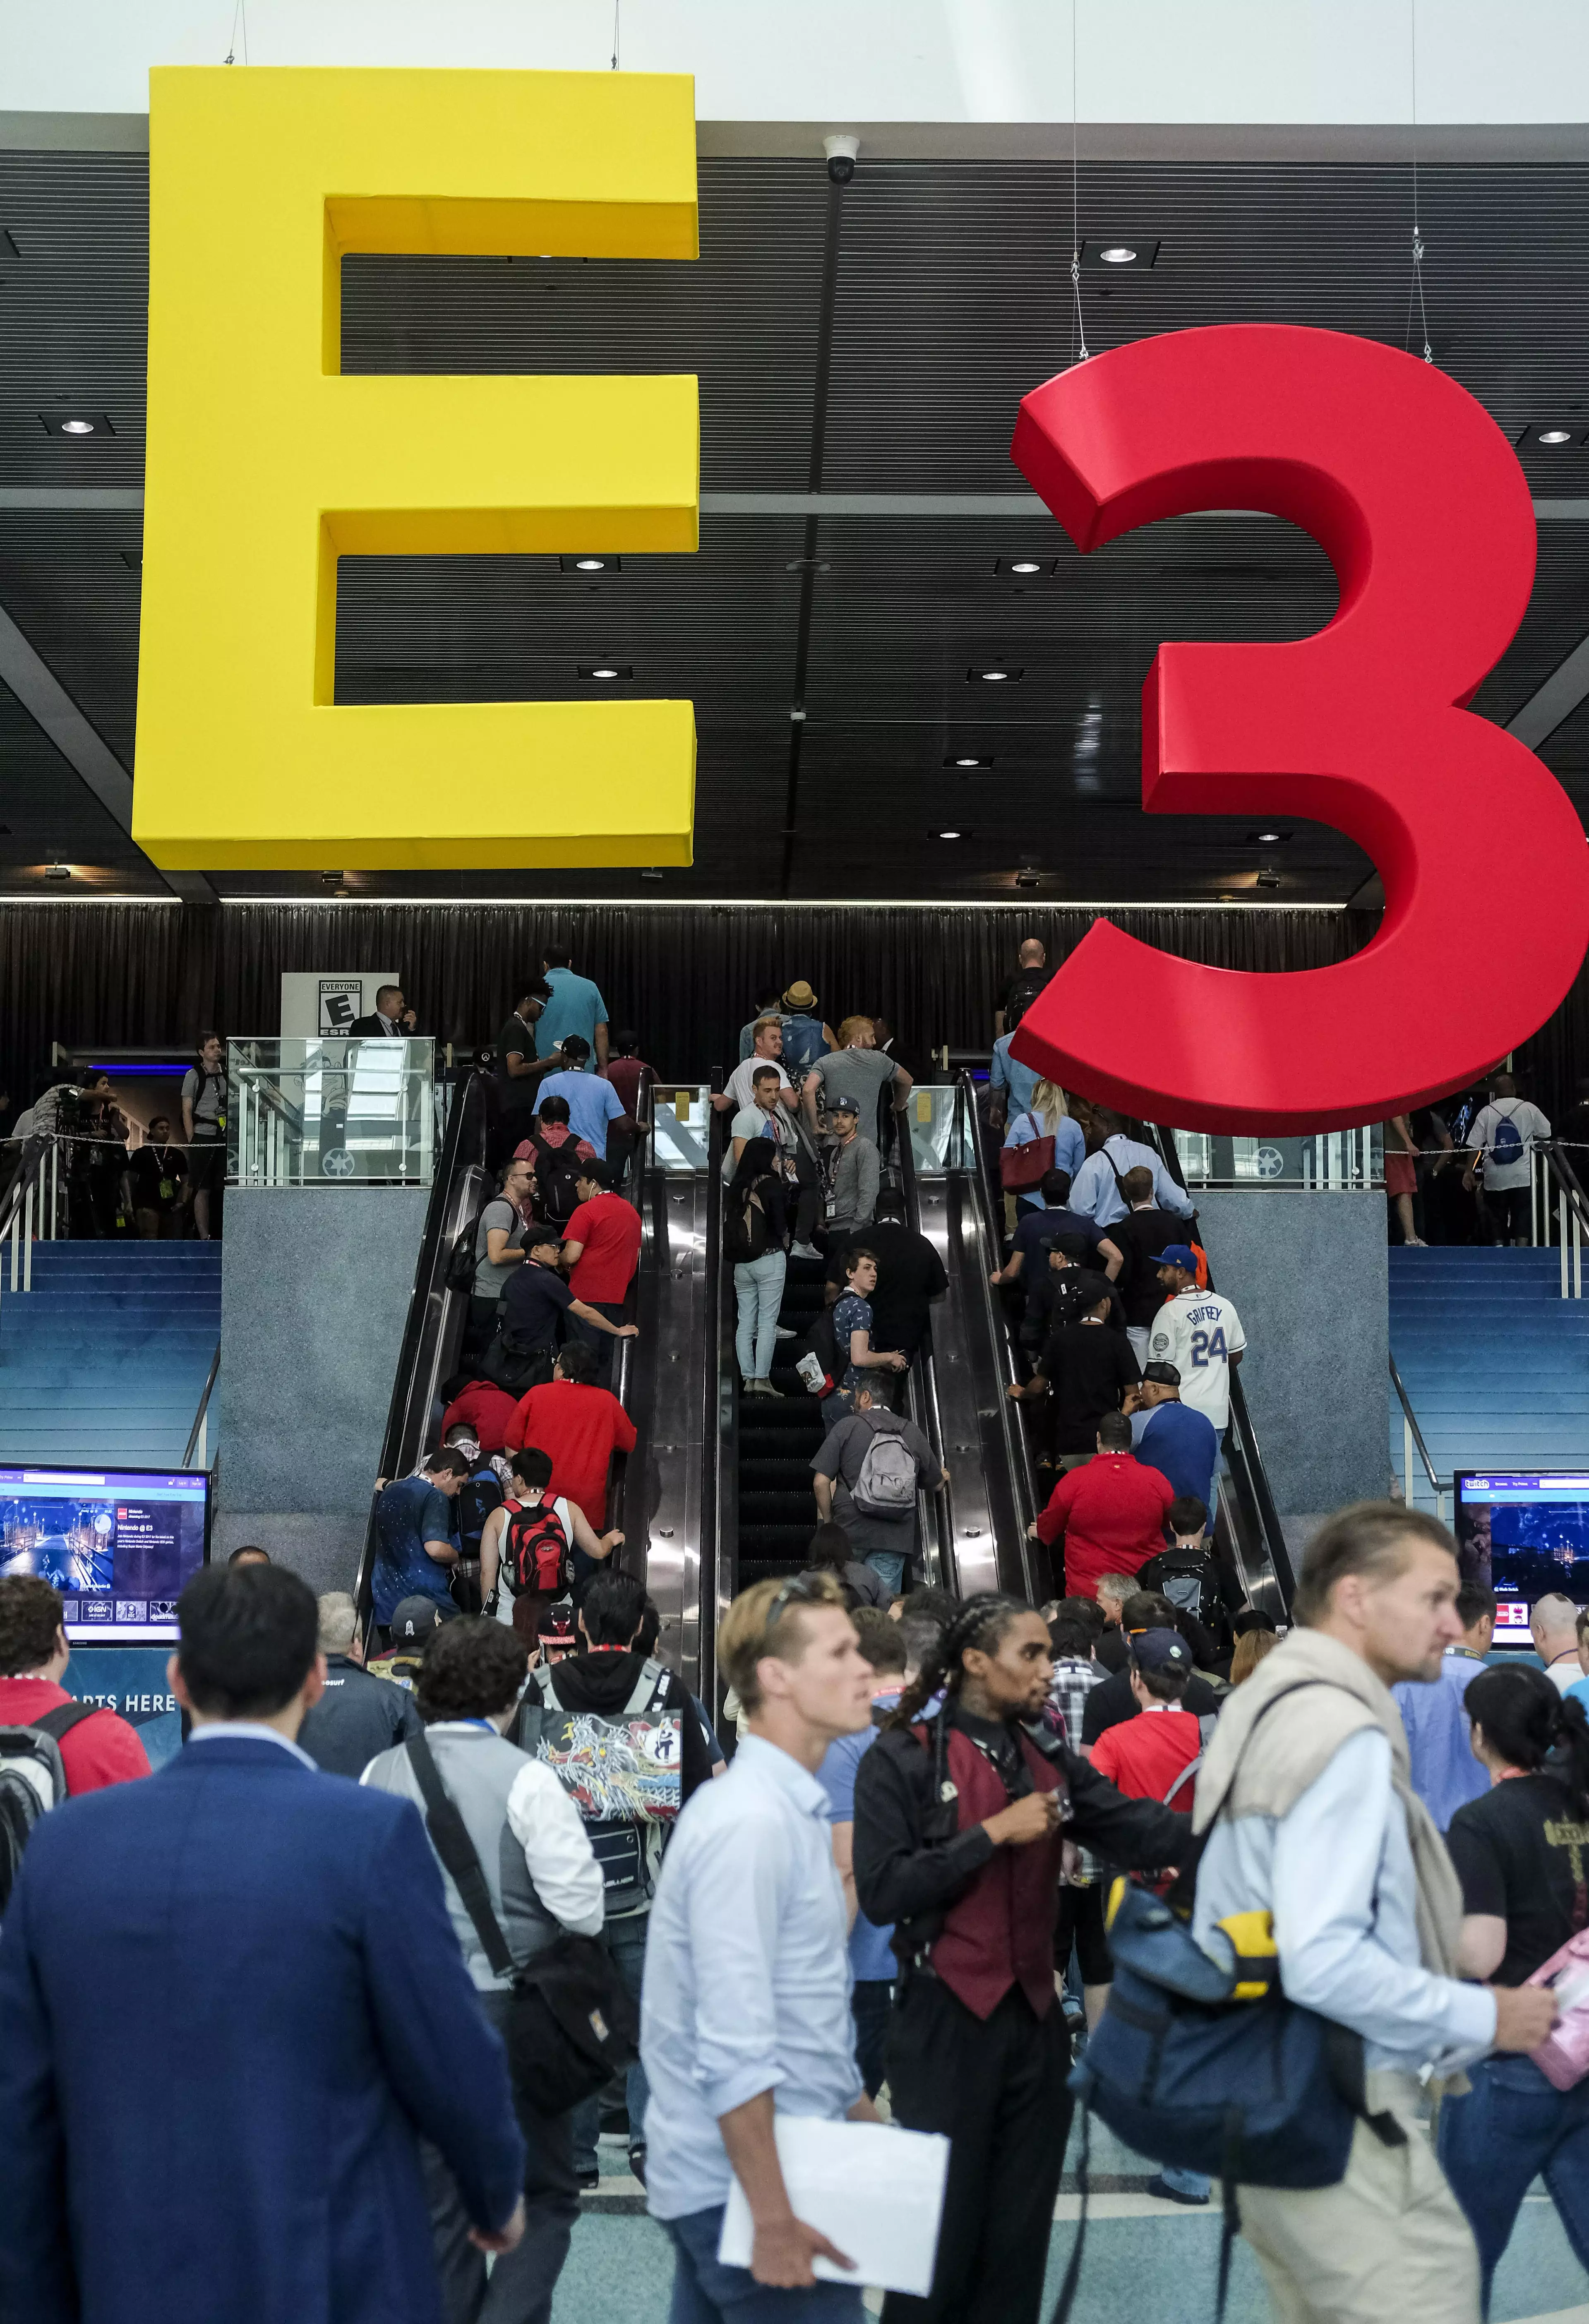 Last year's E3 conference.